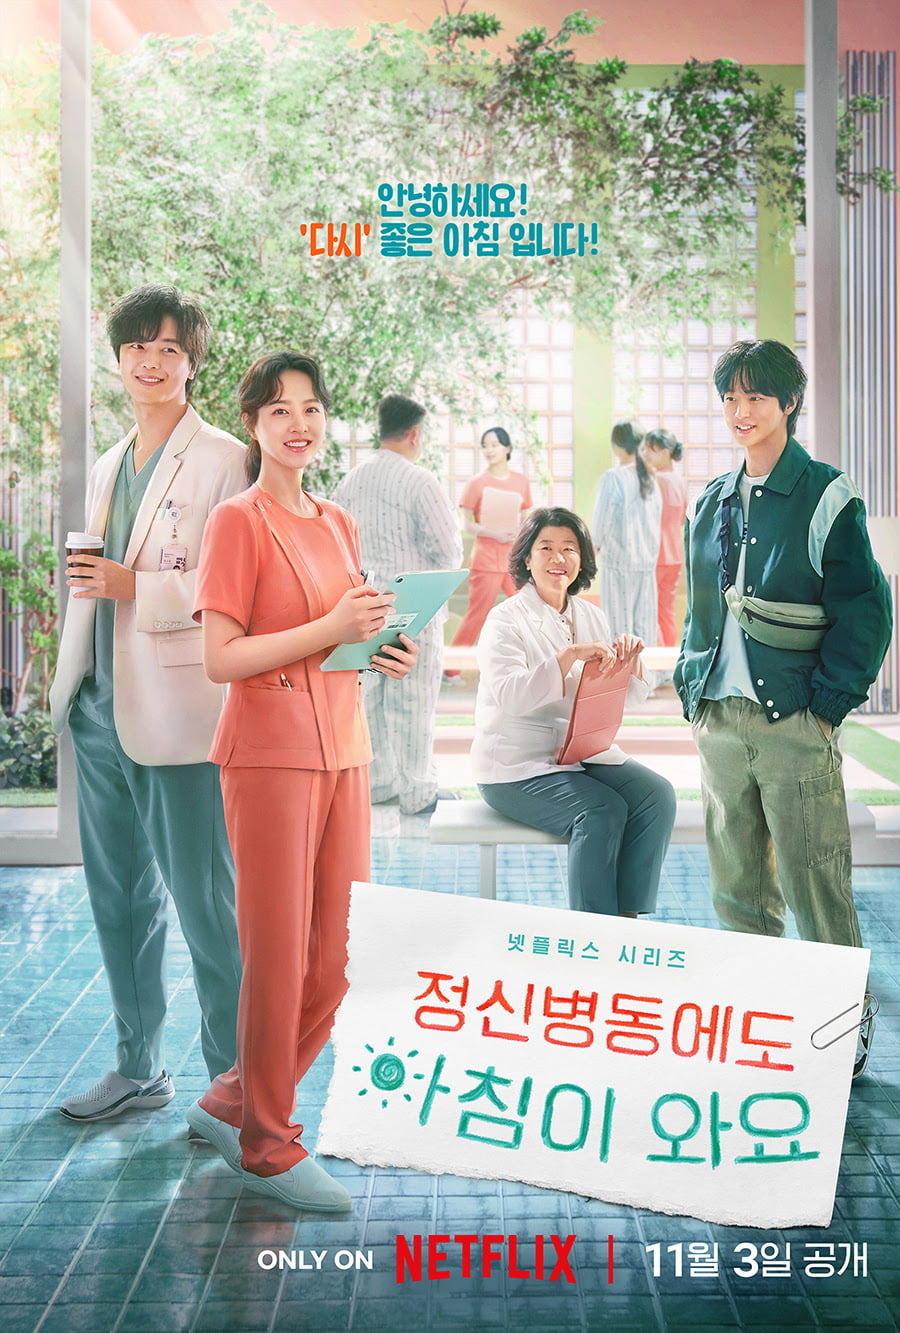 Drama ‘Morning Comes Even in the Psychiatric Ward’, the story of people with cold hearts